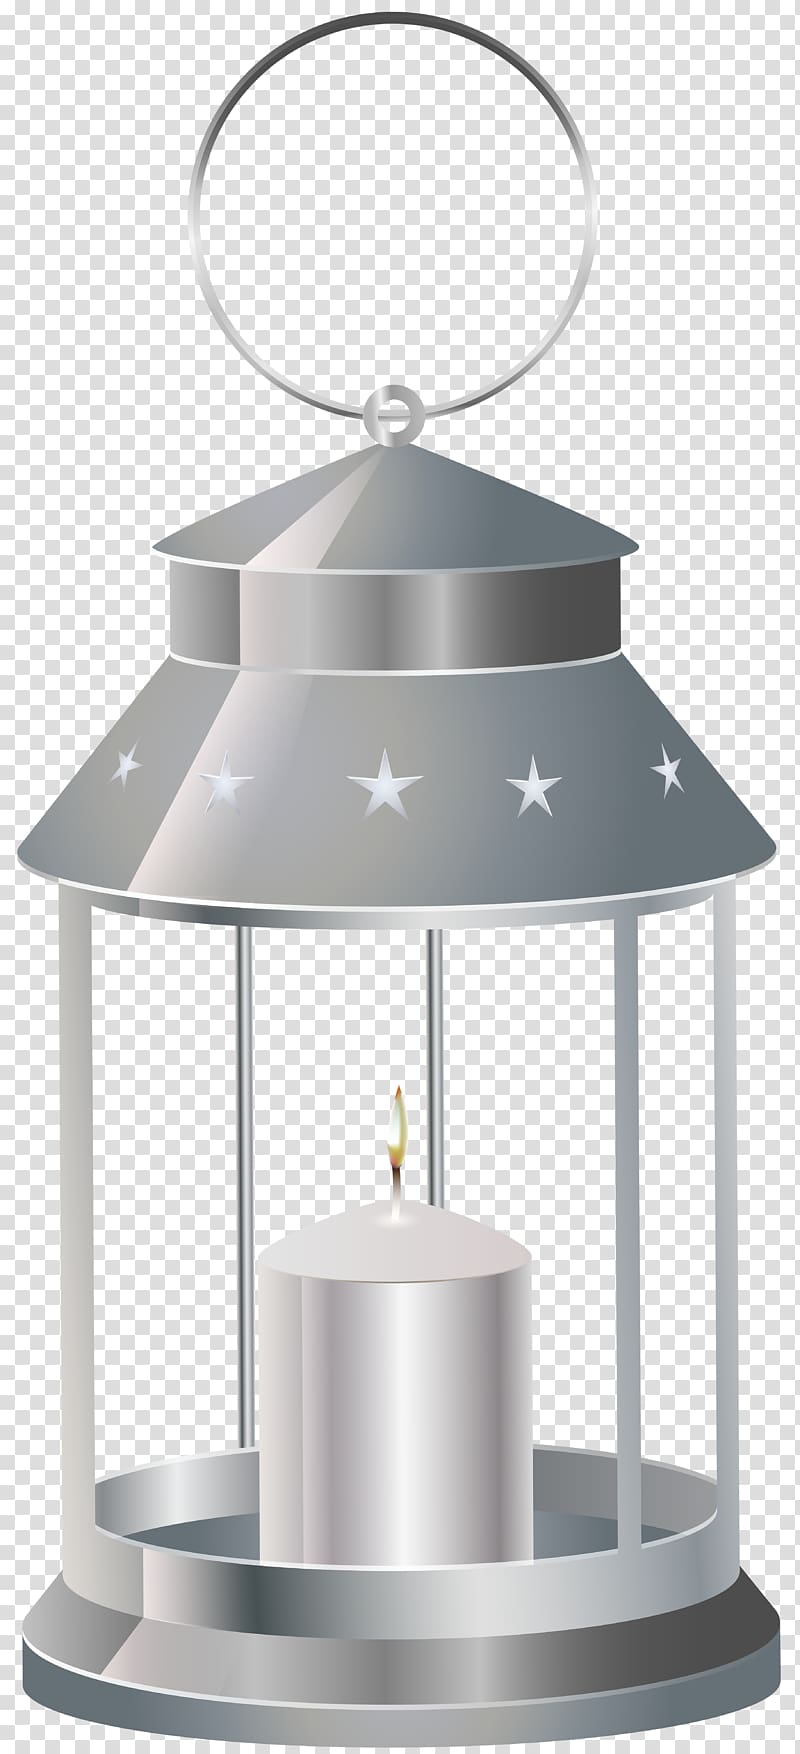 gray candle lantern , Lantern Candle , Silver Lantern with Candle transparent background PNG clipart